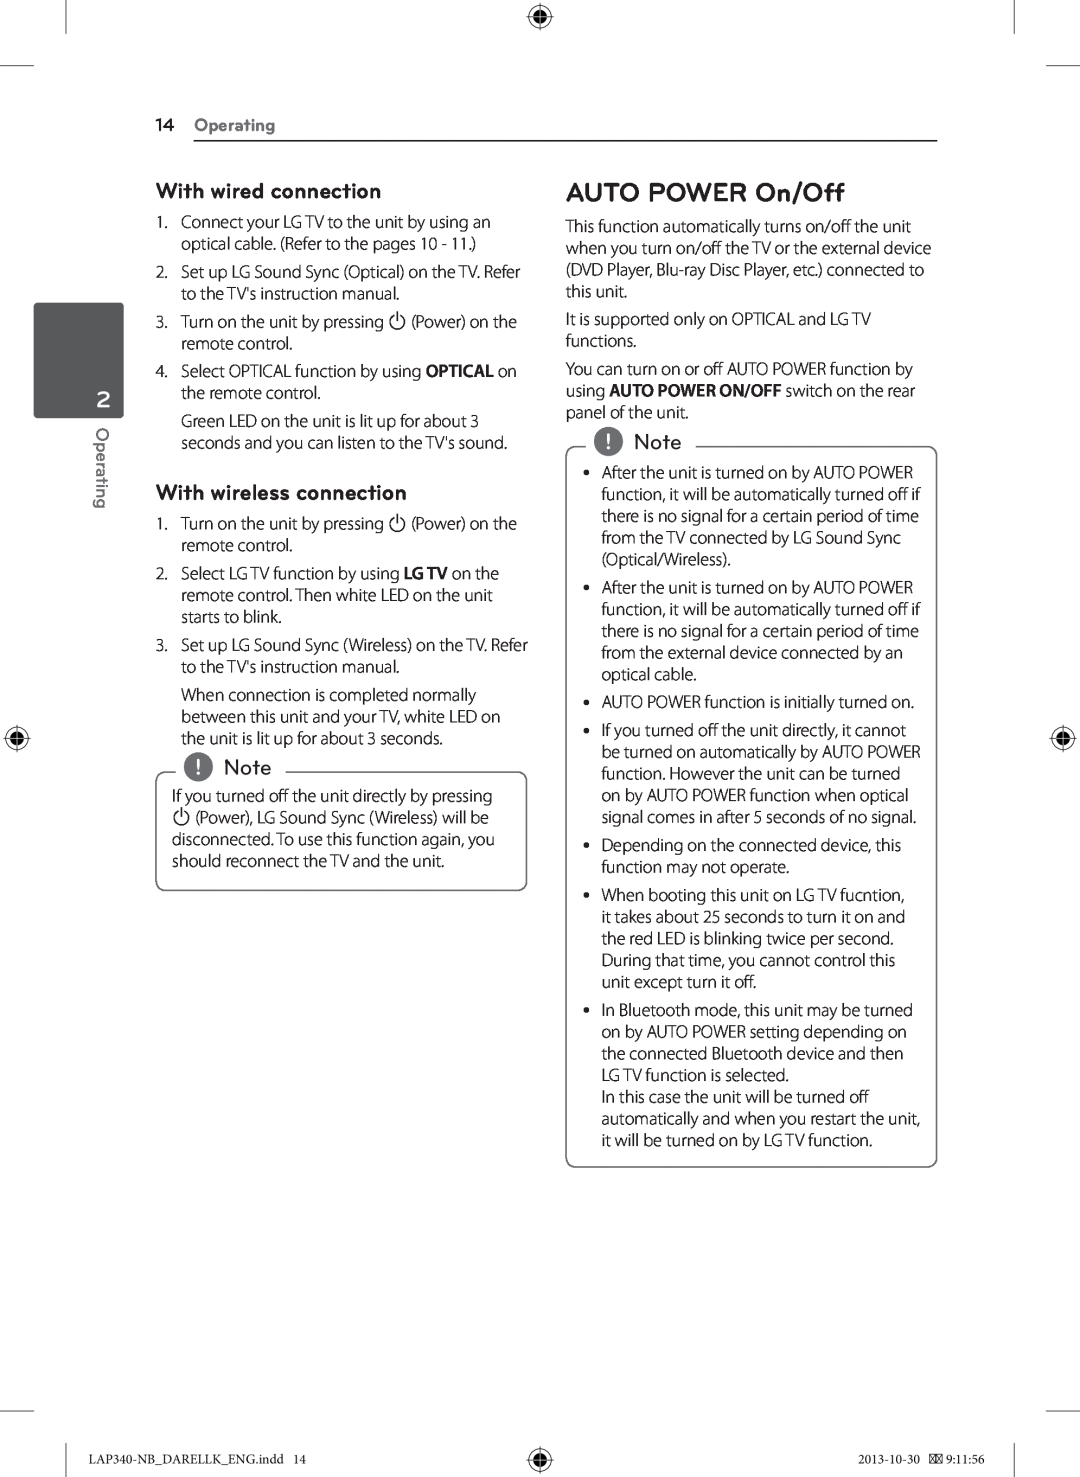 LG Electronics LAP340 owner manual AUTO POWER On/Off, With wired connection, With wireless connection, Operating 